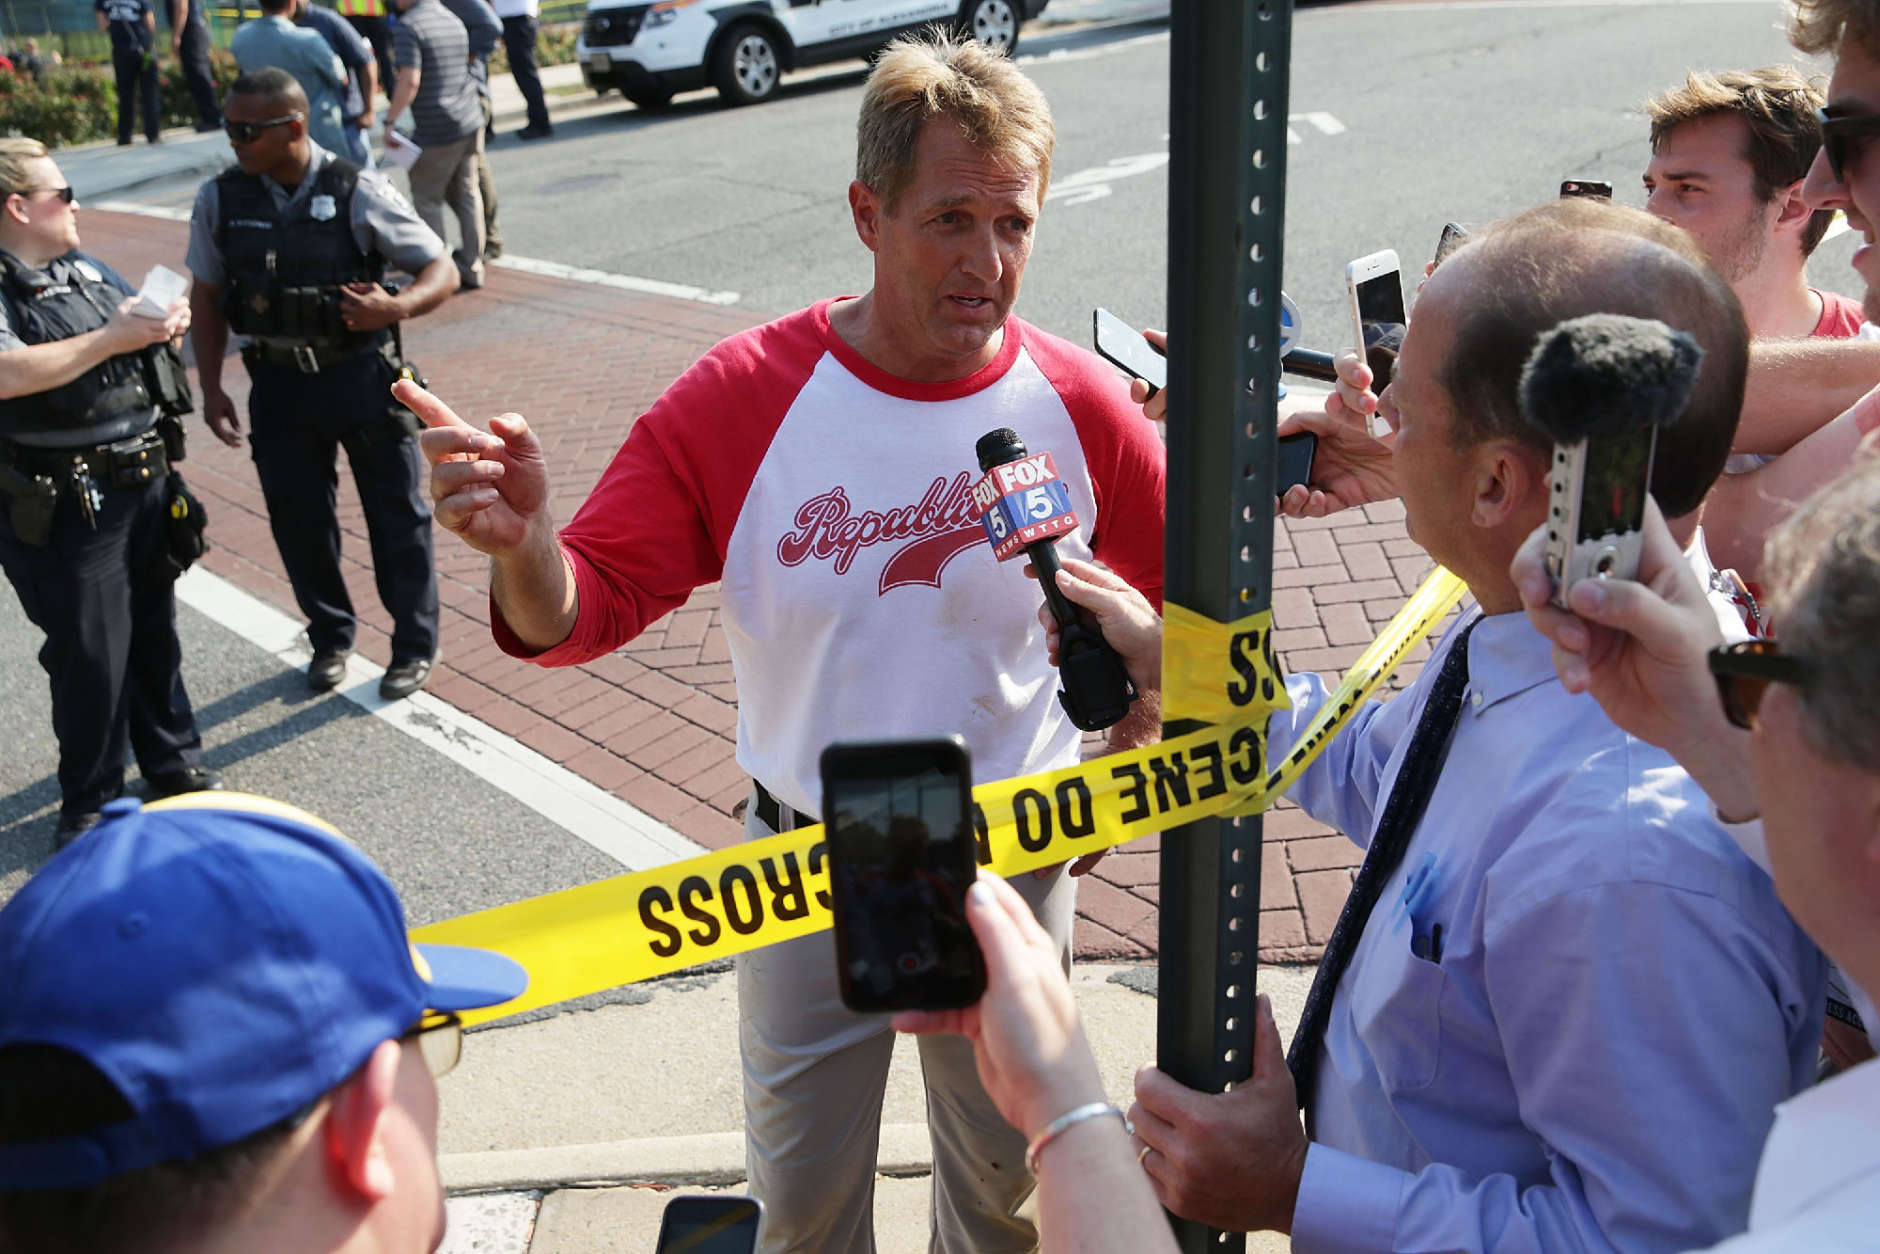 ALEXANDRIA, VA - JUNE 14:  U.S. Sen. Jeff Flake (R-AZ) briefs members of the media near Eugene Simpson Stadium Park where a shooting took place on June 14, 2017 in Alexandria, Virginia. U.S. House Majority Whip Rep. Steve Scalise (R-LA) and multiple congressional aides were shot by a gunman during a Republican baseball practice.  (Photo by Alex Wong/Getty Images)